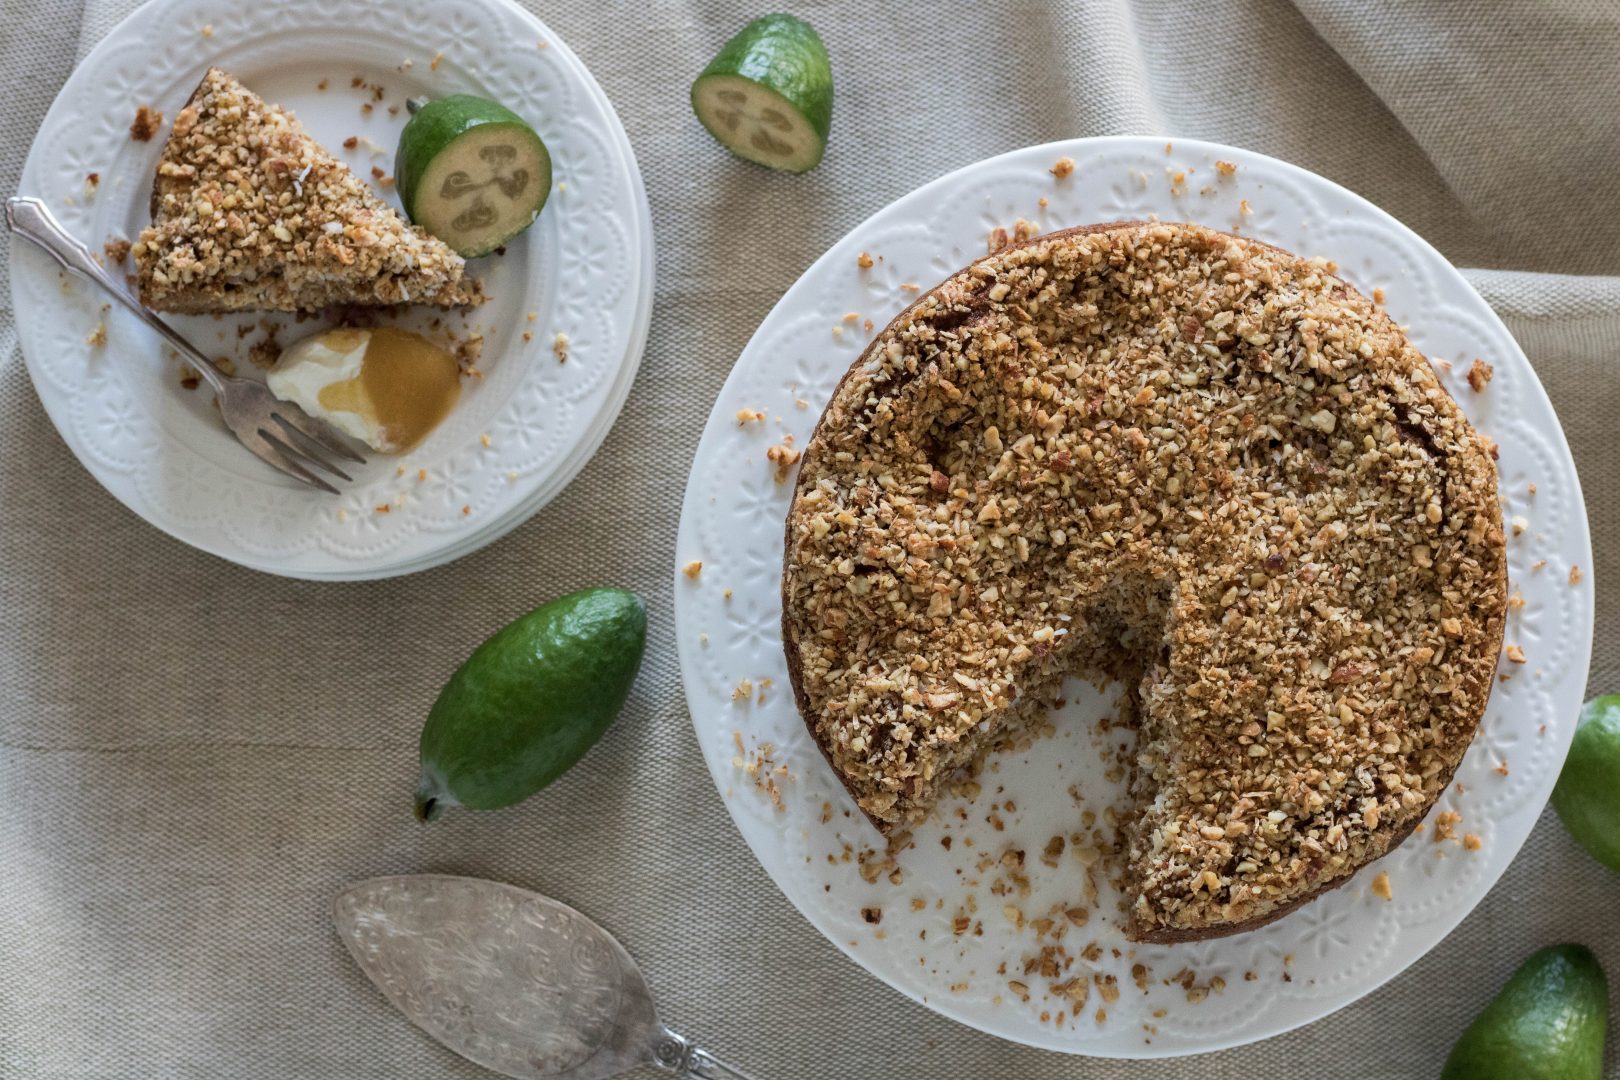 Feijoa Cake with Crumble Topping